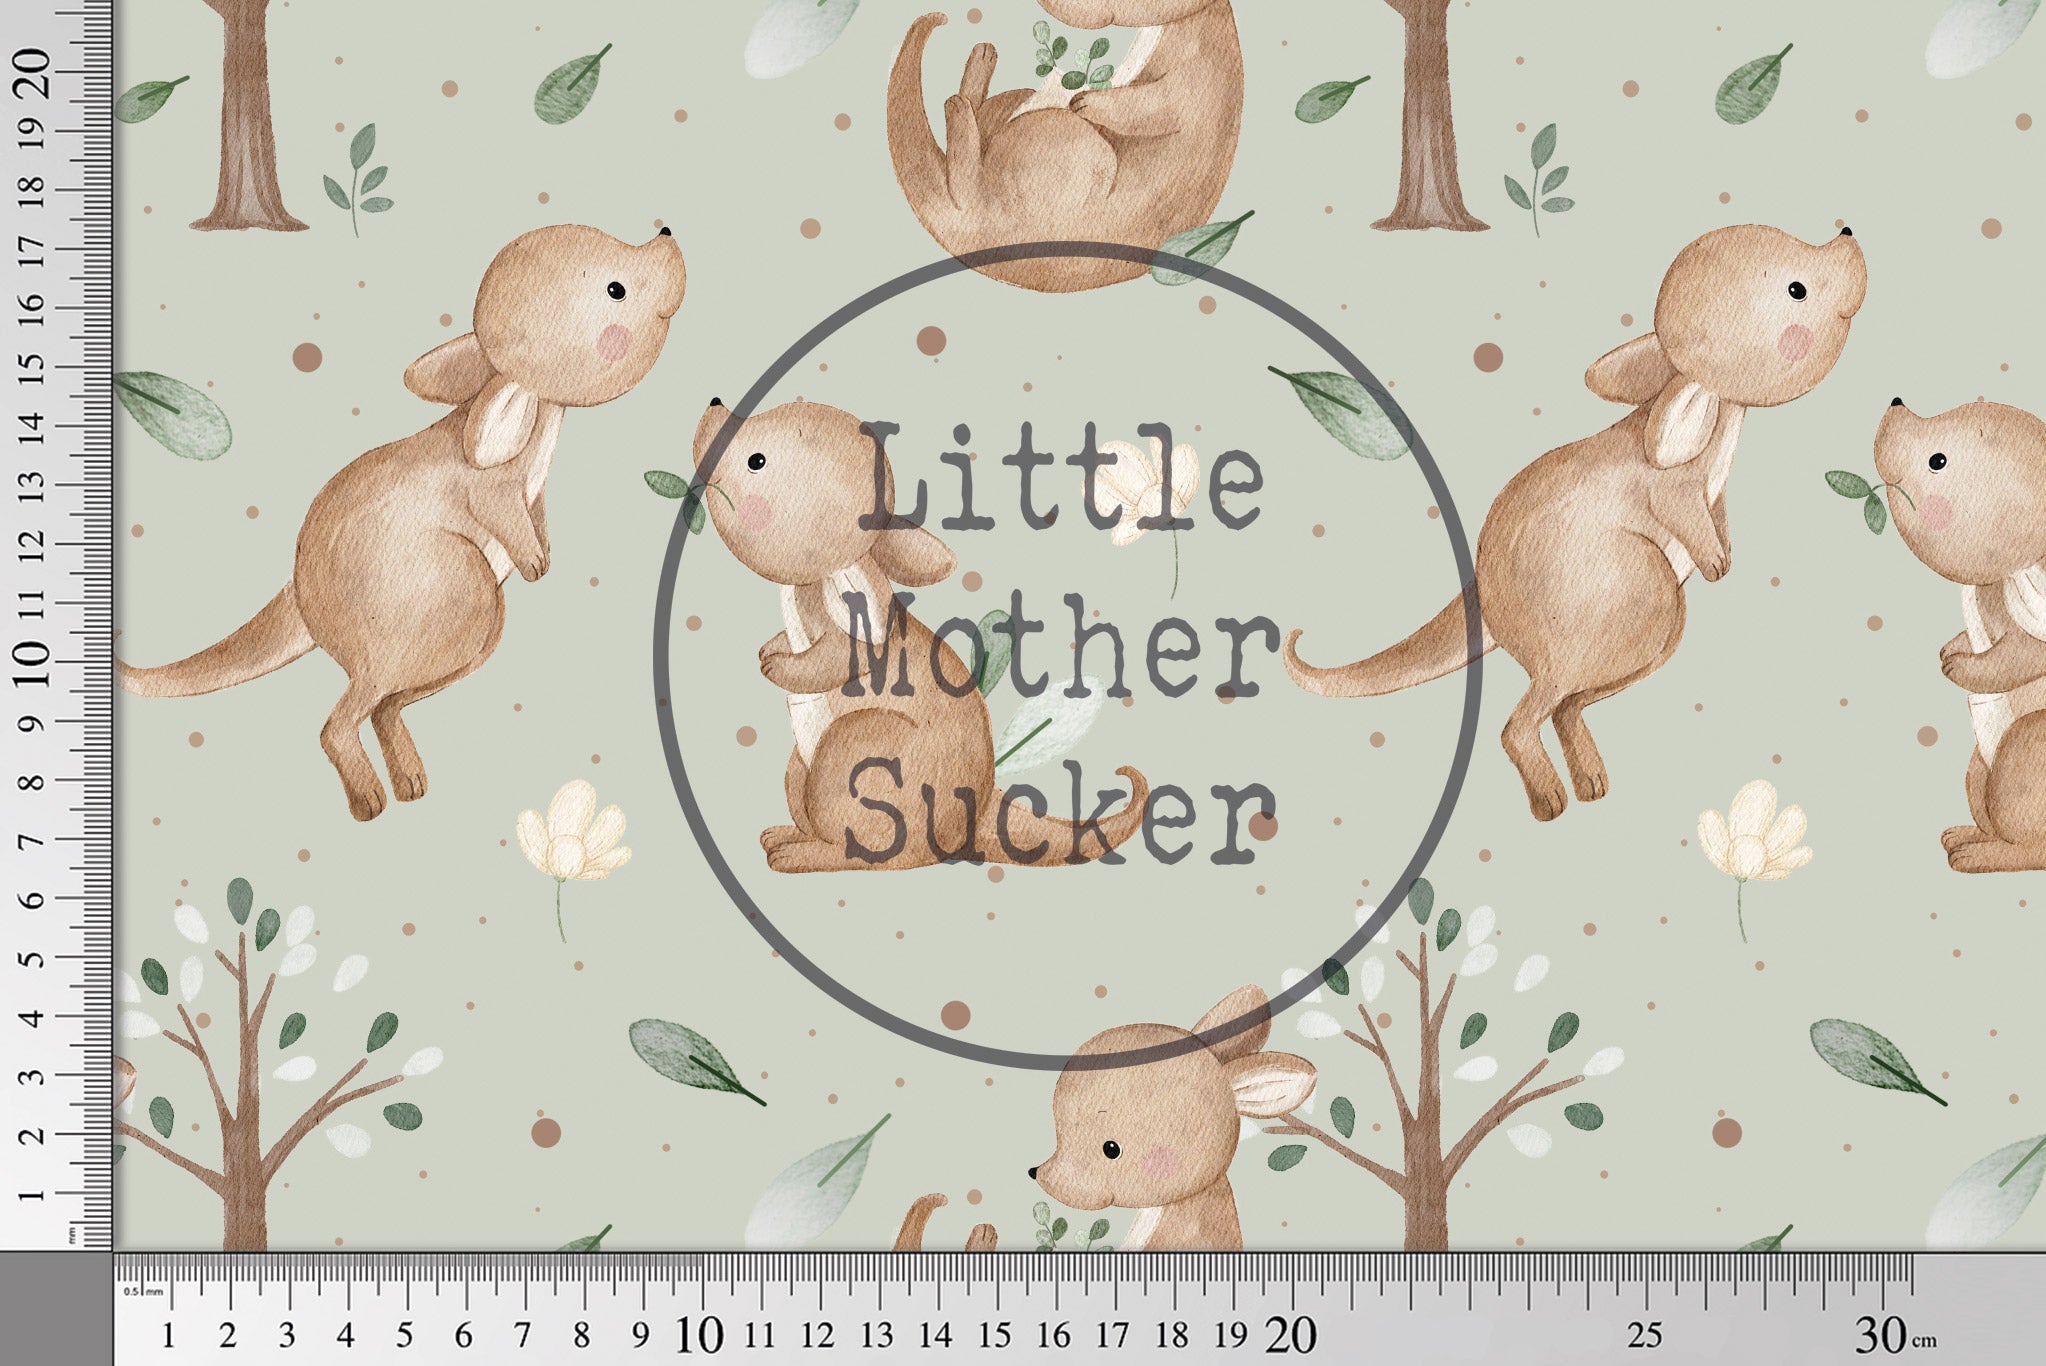 Design "Little Joey" COLLECTION 0,5 m